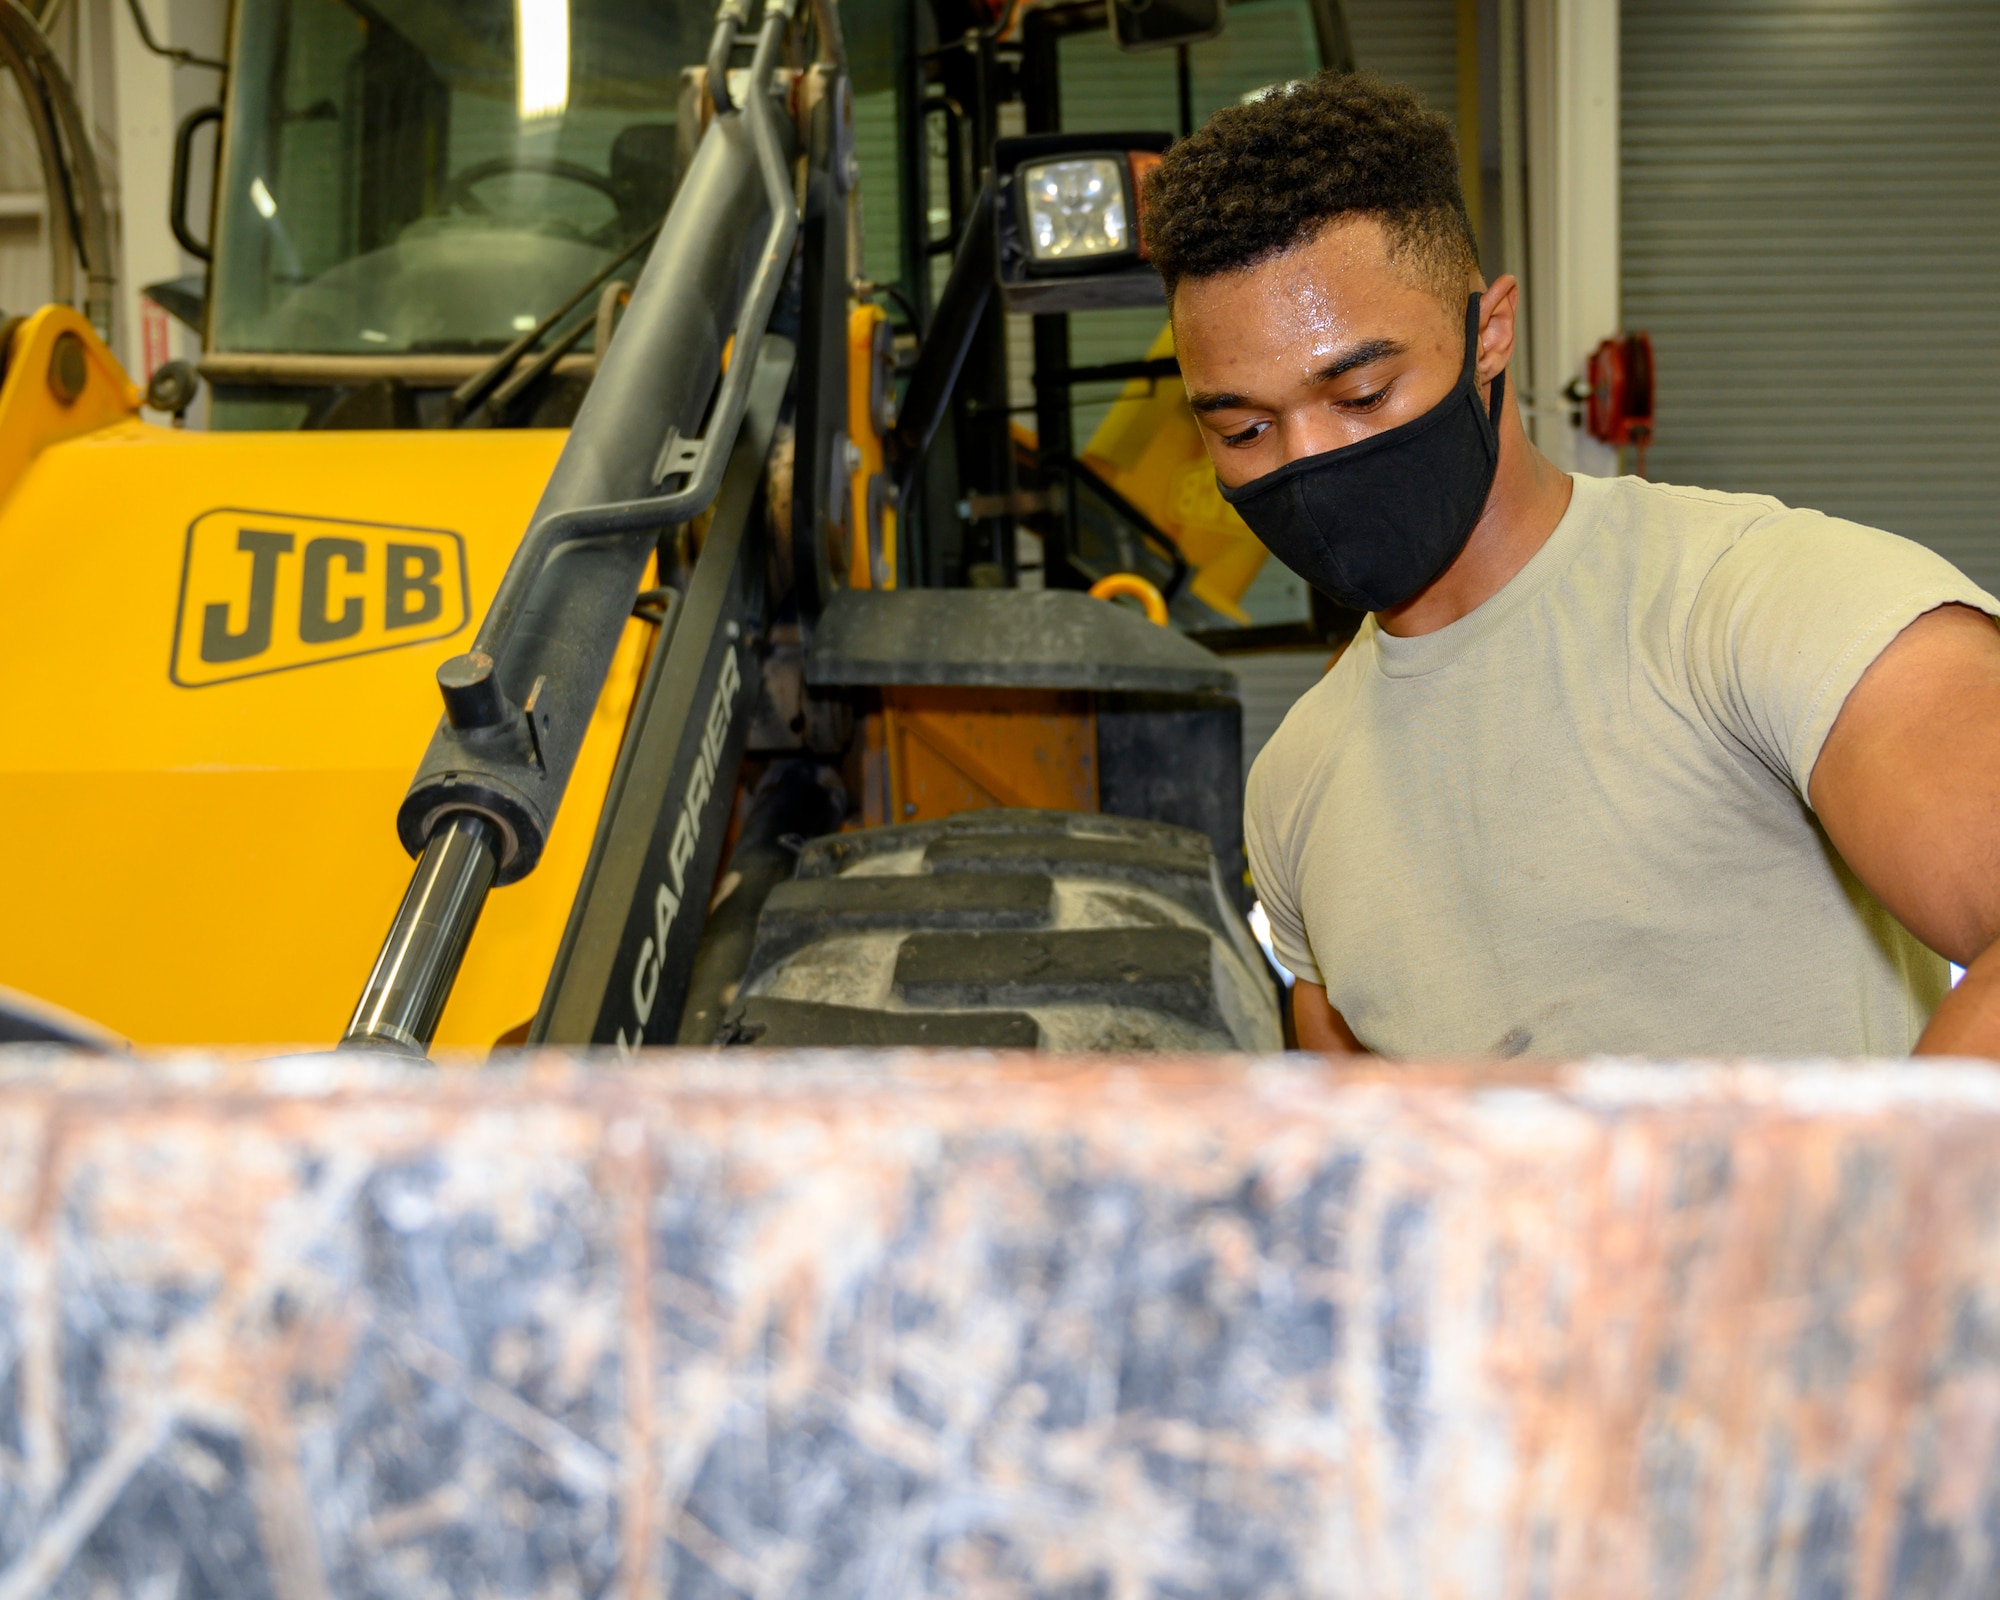 An Airman greases the joints of a special purpose heavy vehicle.